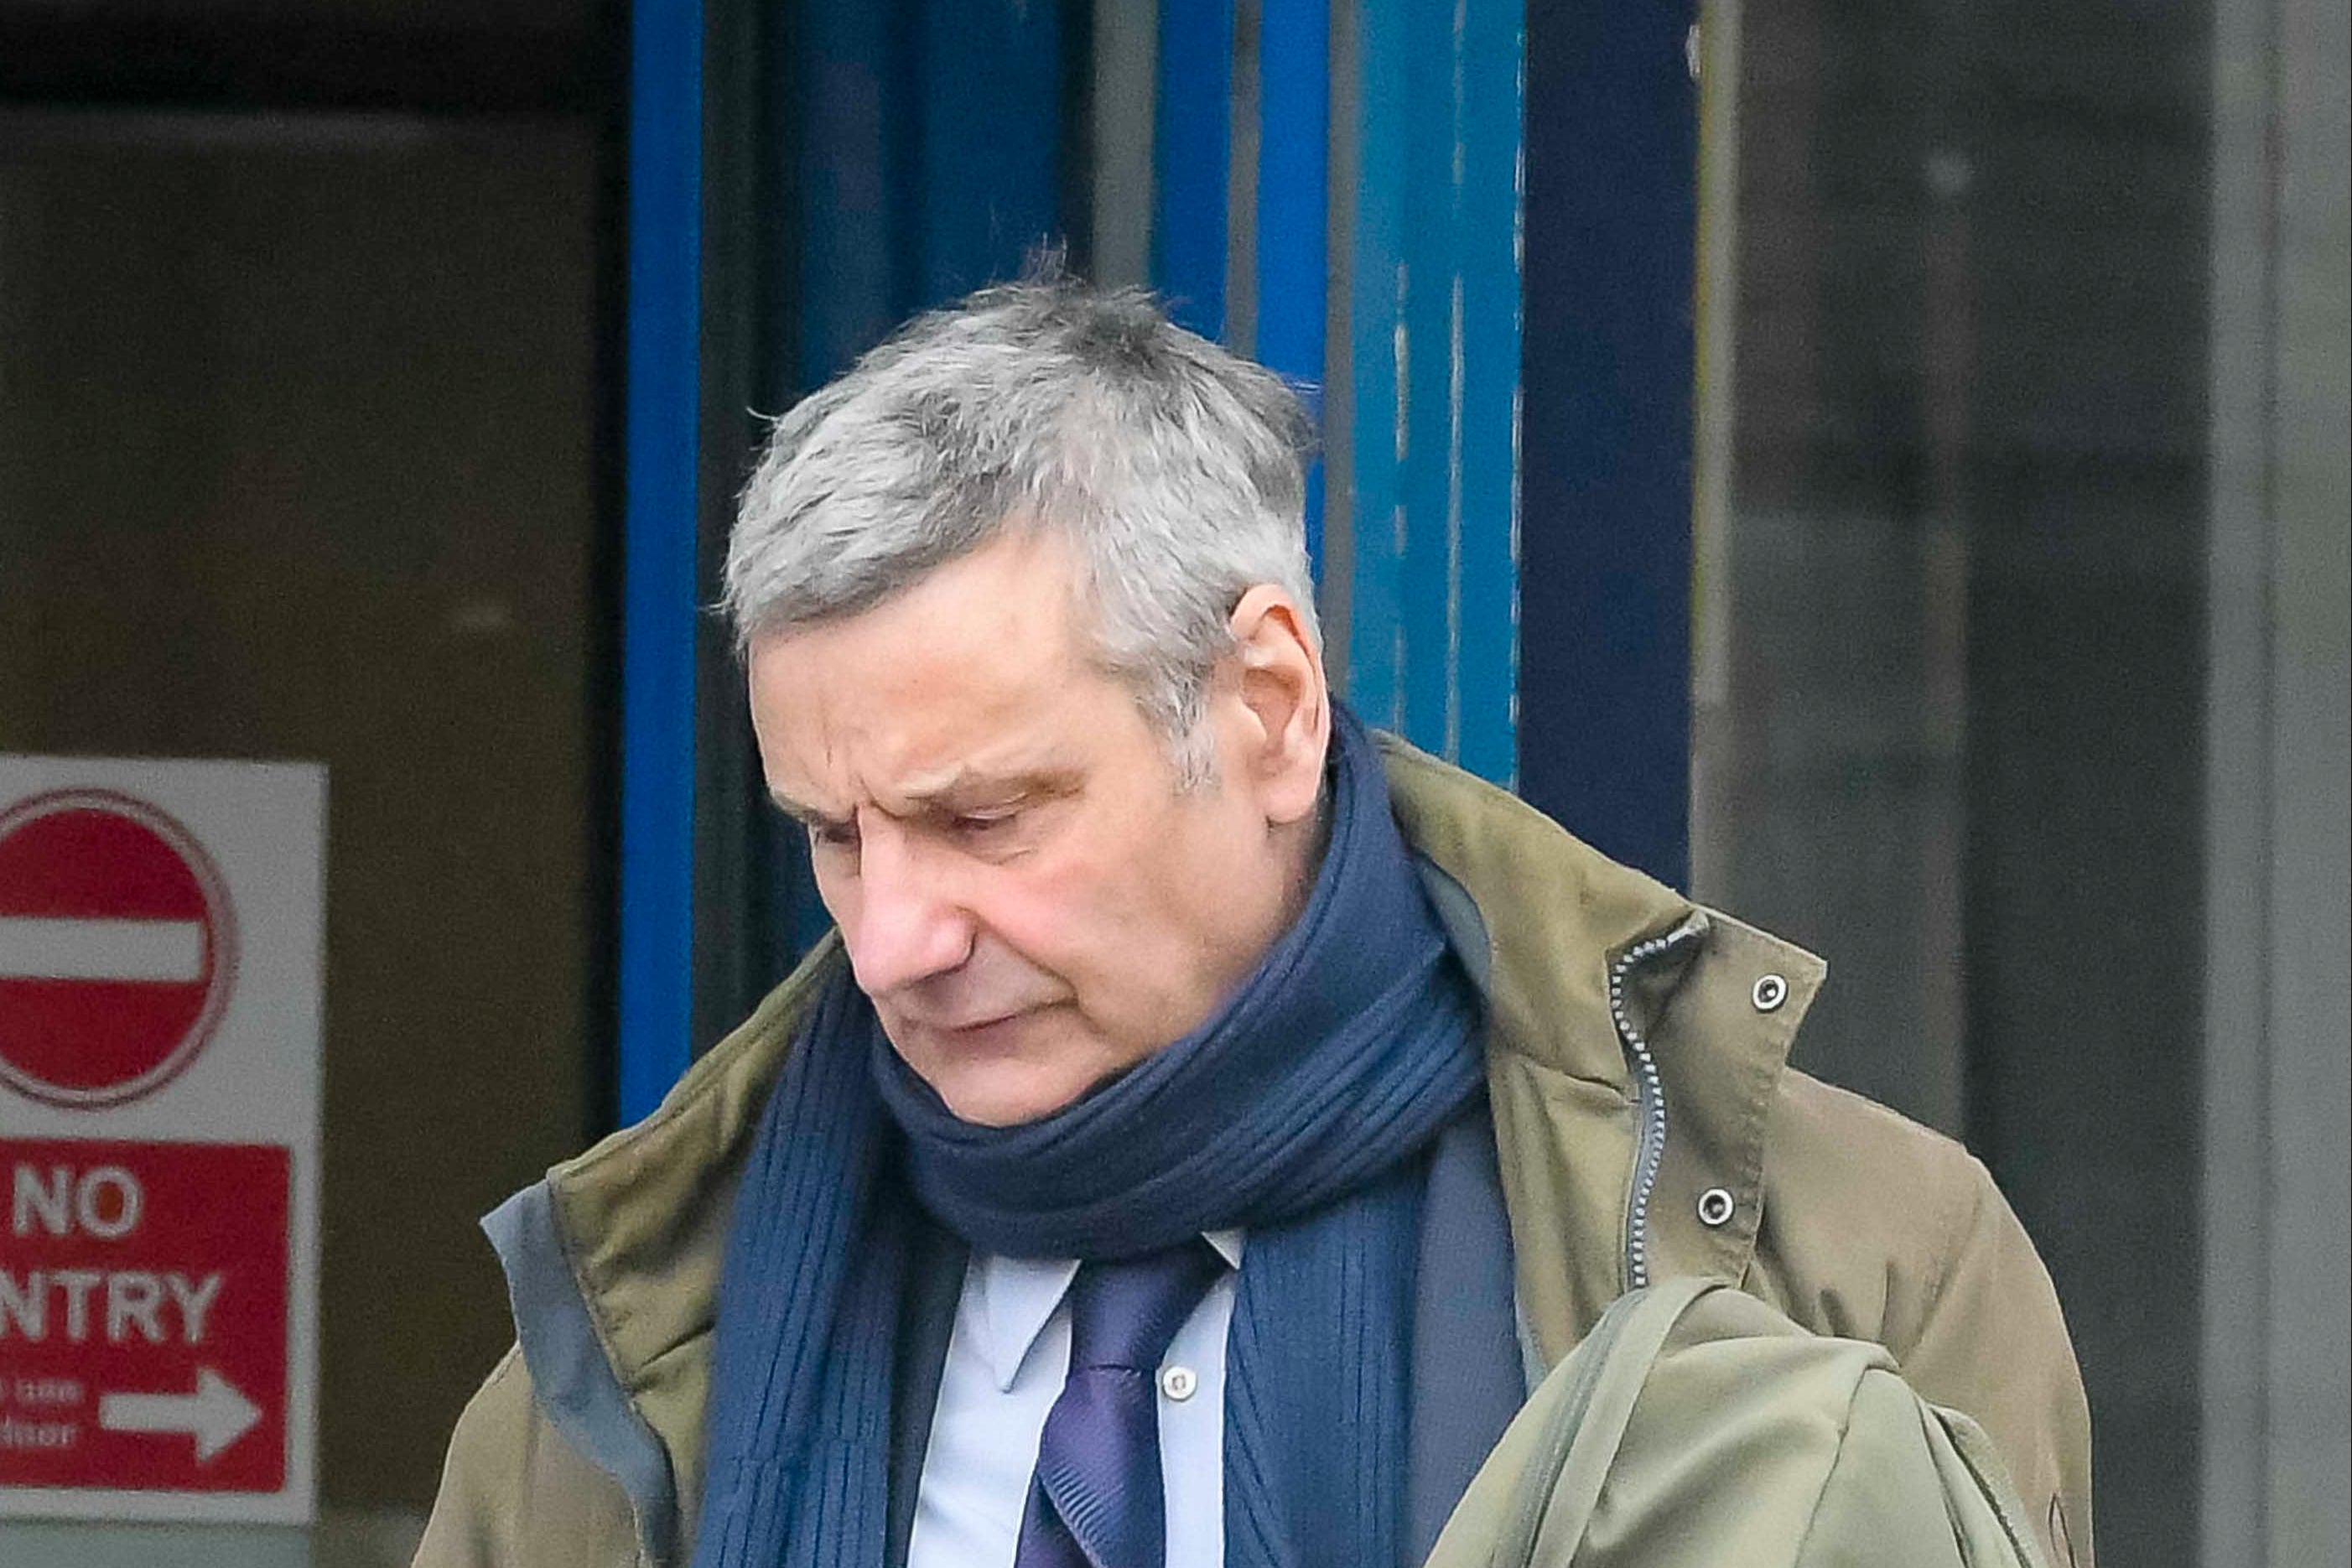 Peter Abbott, 60, pictured outside of court